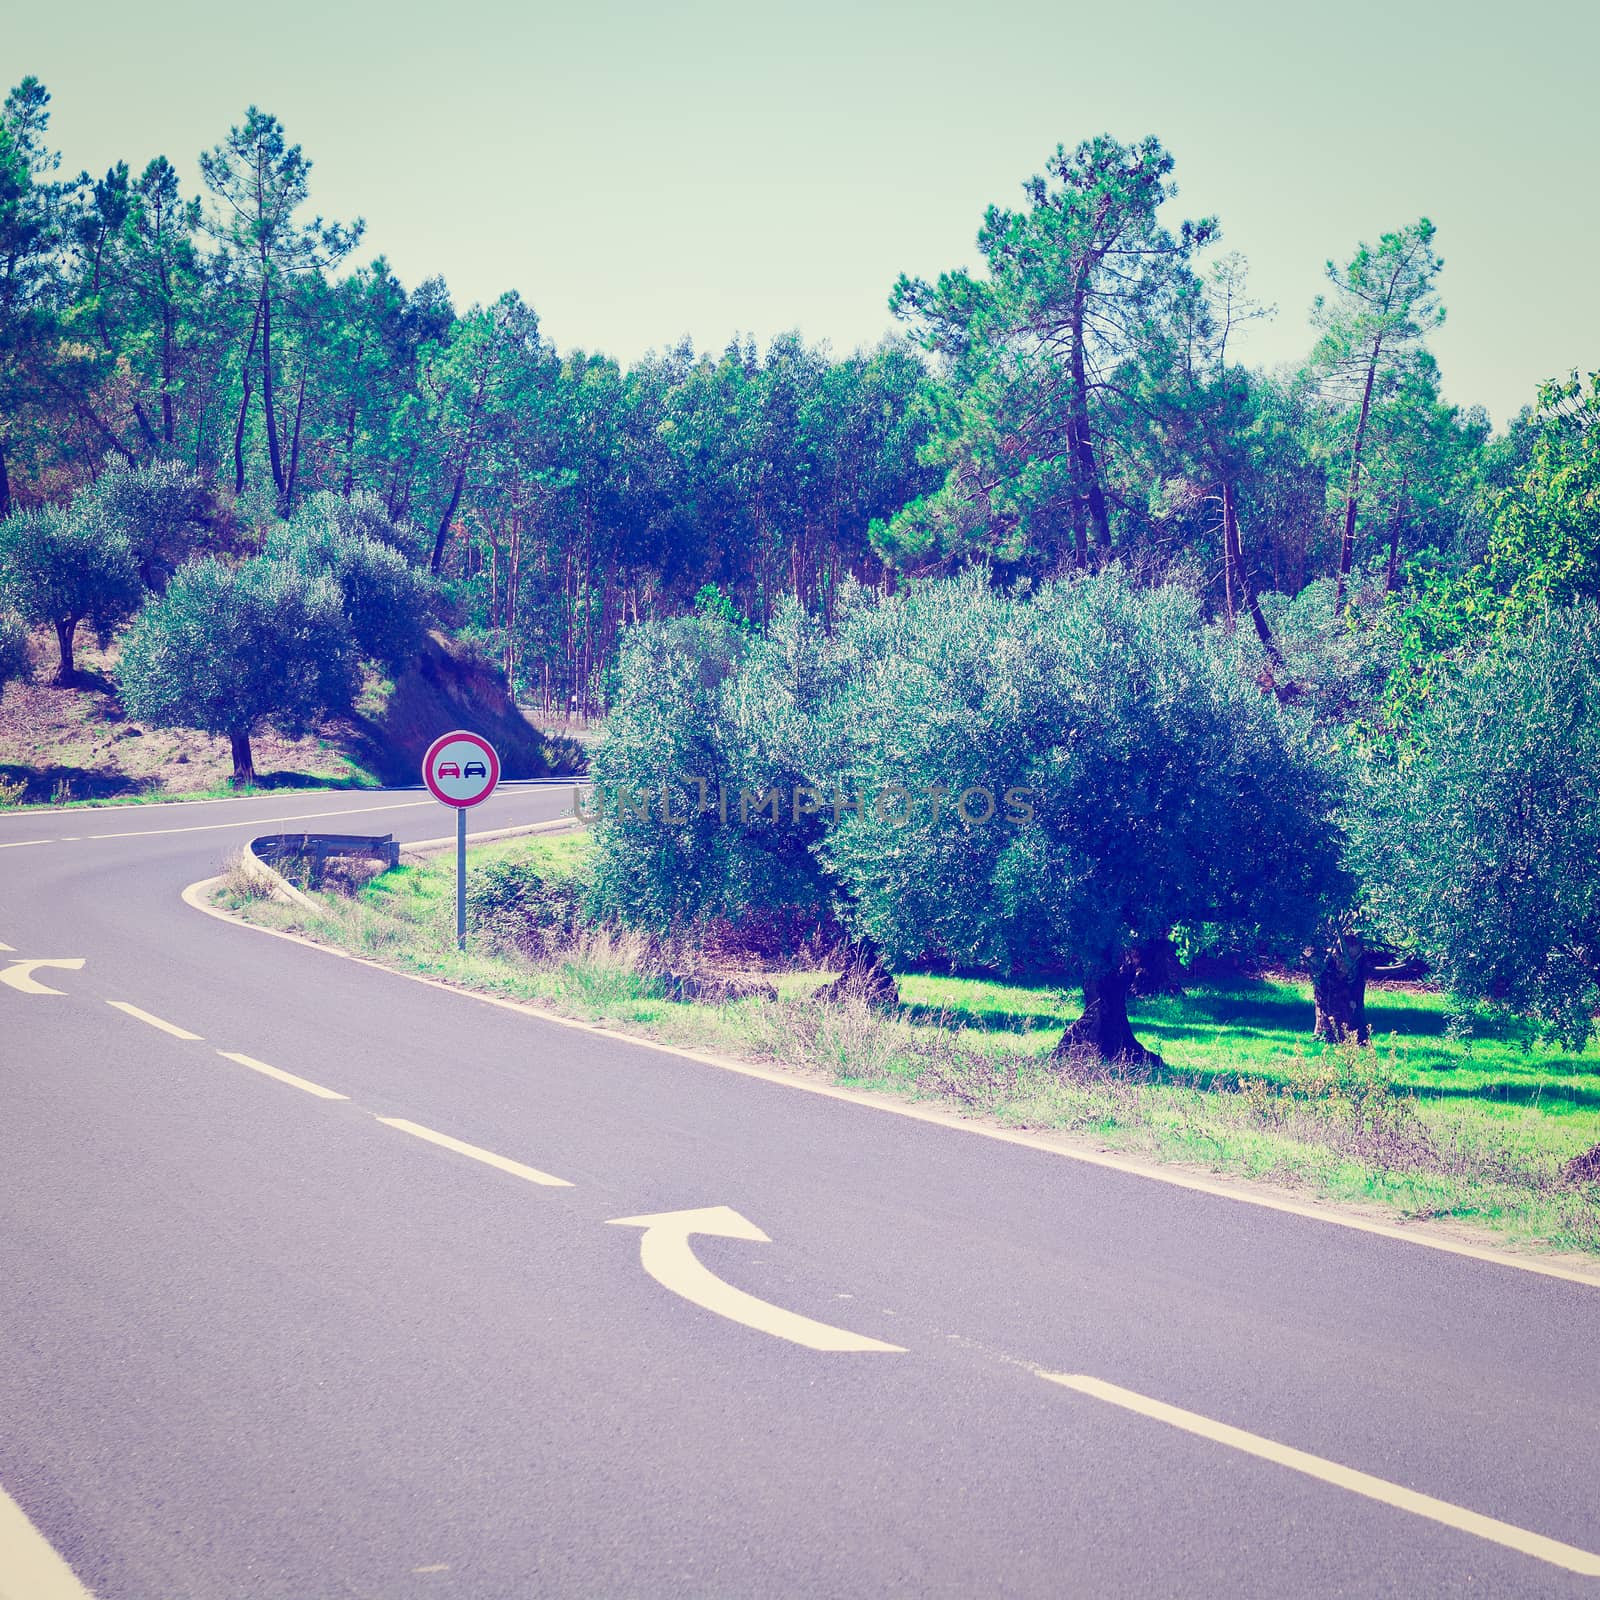 Forest Asphalt Road in Portugal between Hills Covered with Olive Trees, Instagram Effect